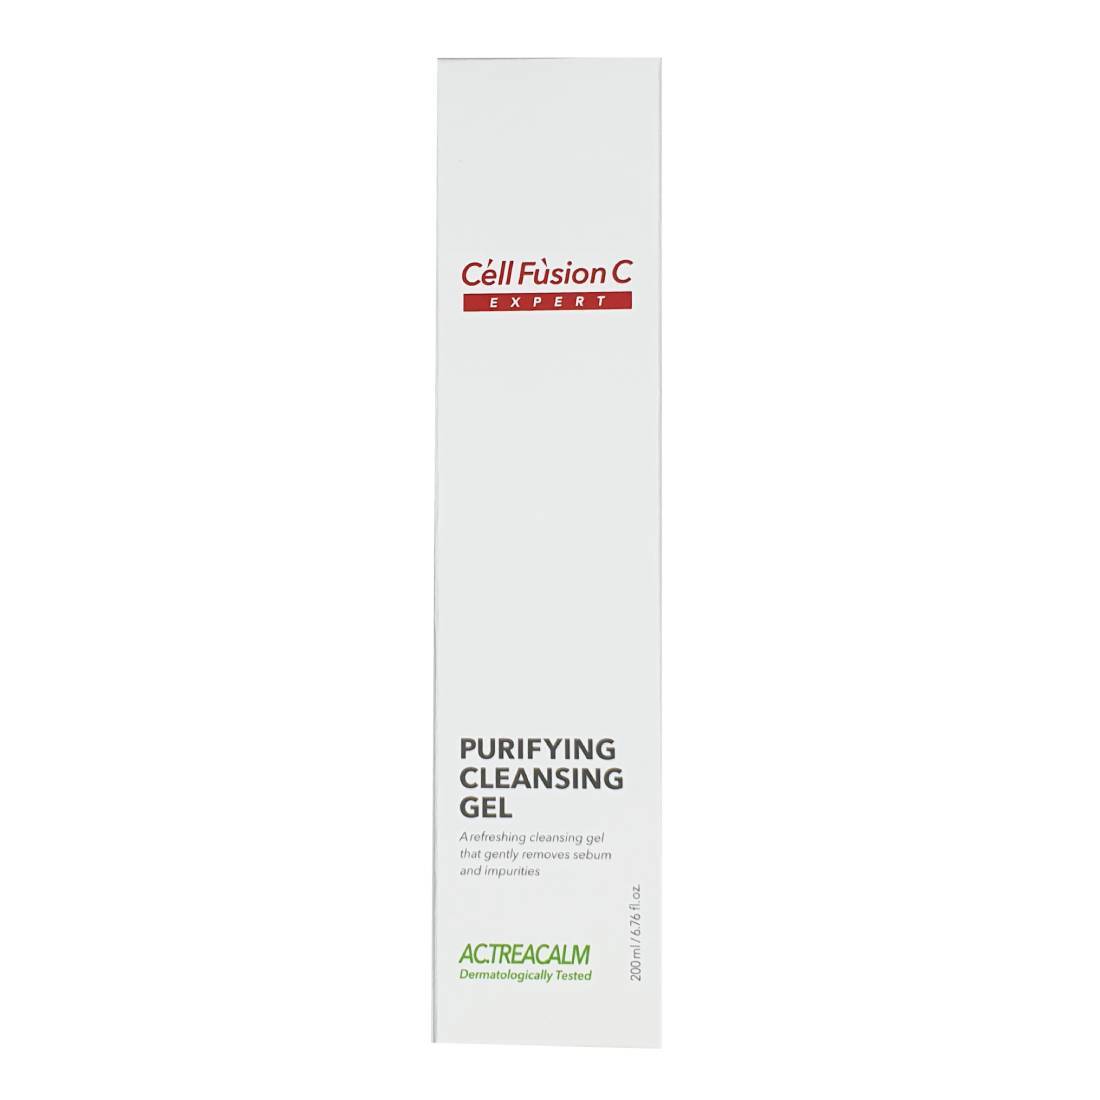 Purifying cleansing gel. Purifying Gel Cell Fusion. Cell Fusion c Purifying Cleansing Gel. Cell Fusion c Purifying Cleansing Gel гель очищающий 200 мл.. Purifying Cleansing Gel 200мл Janssens.